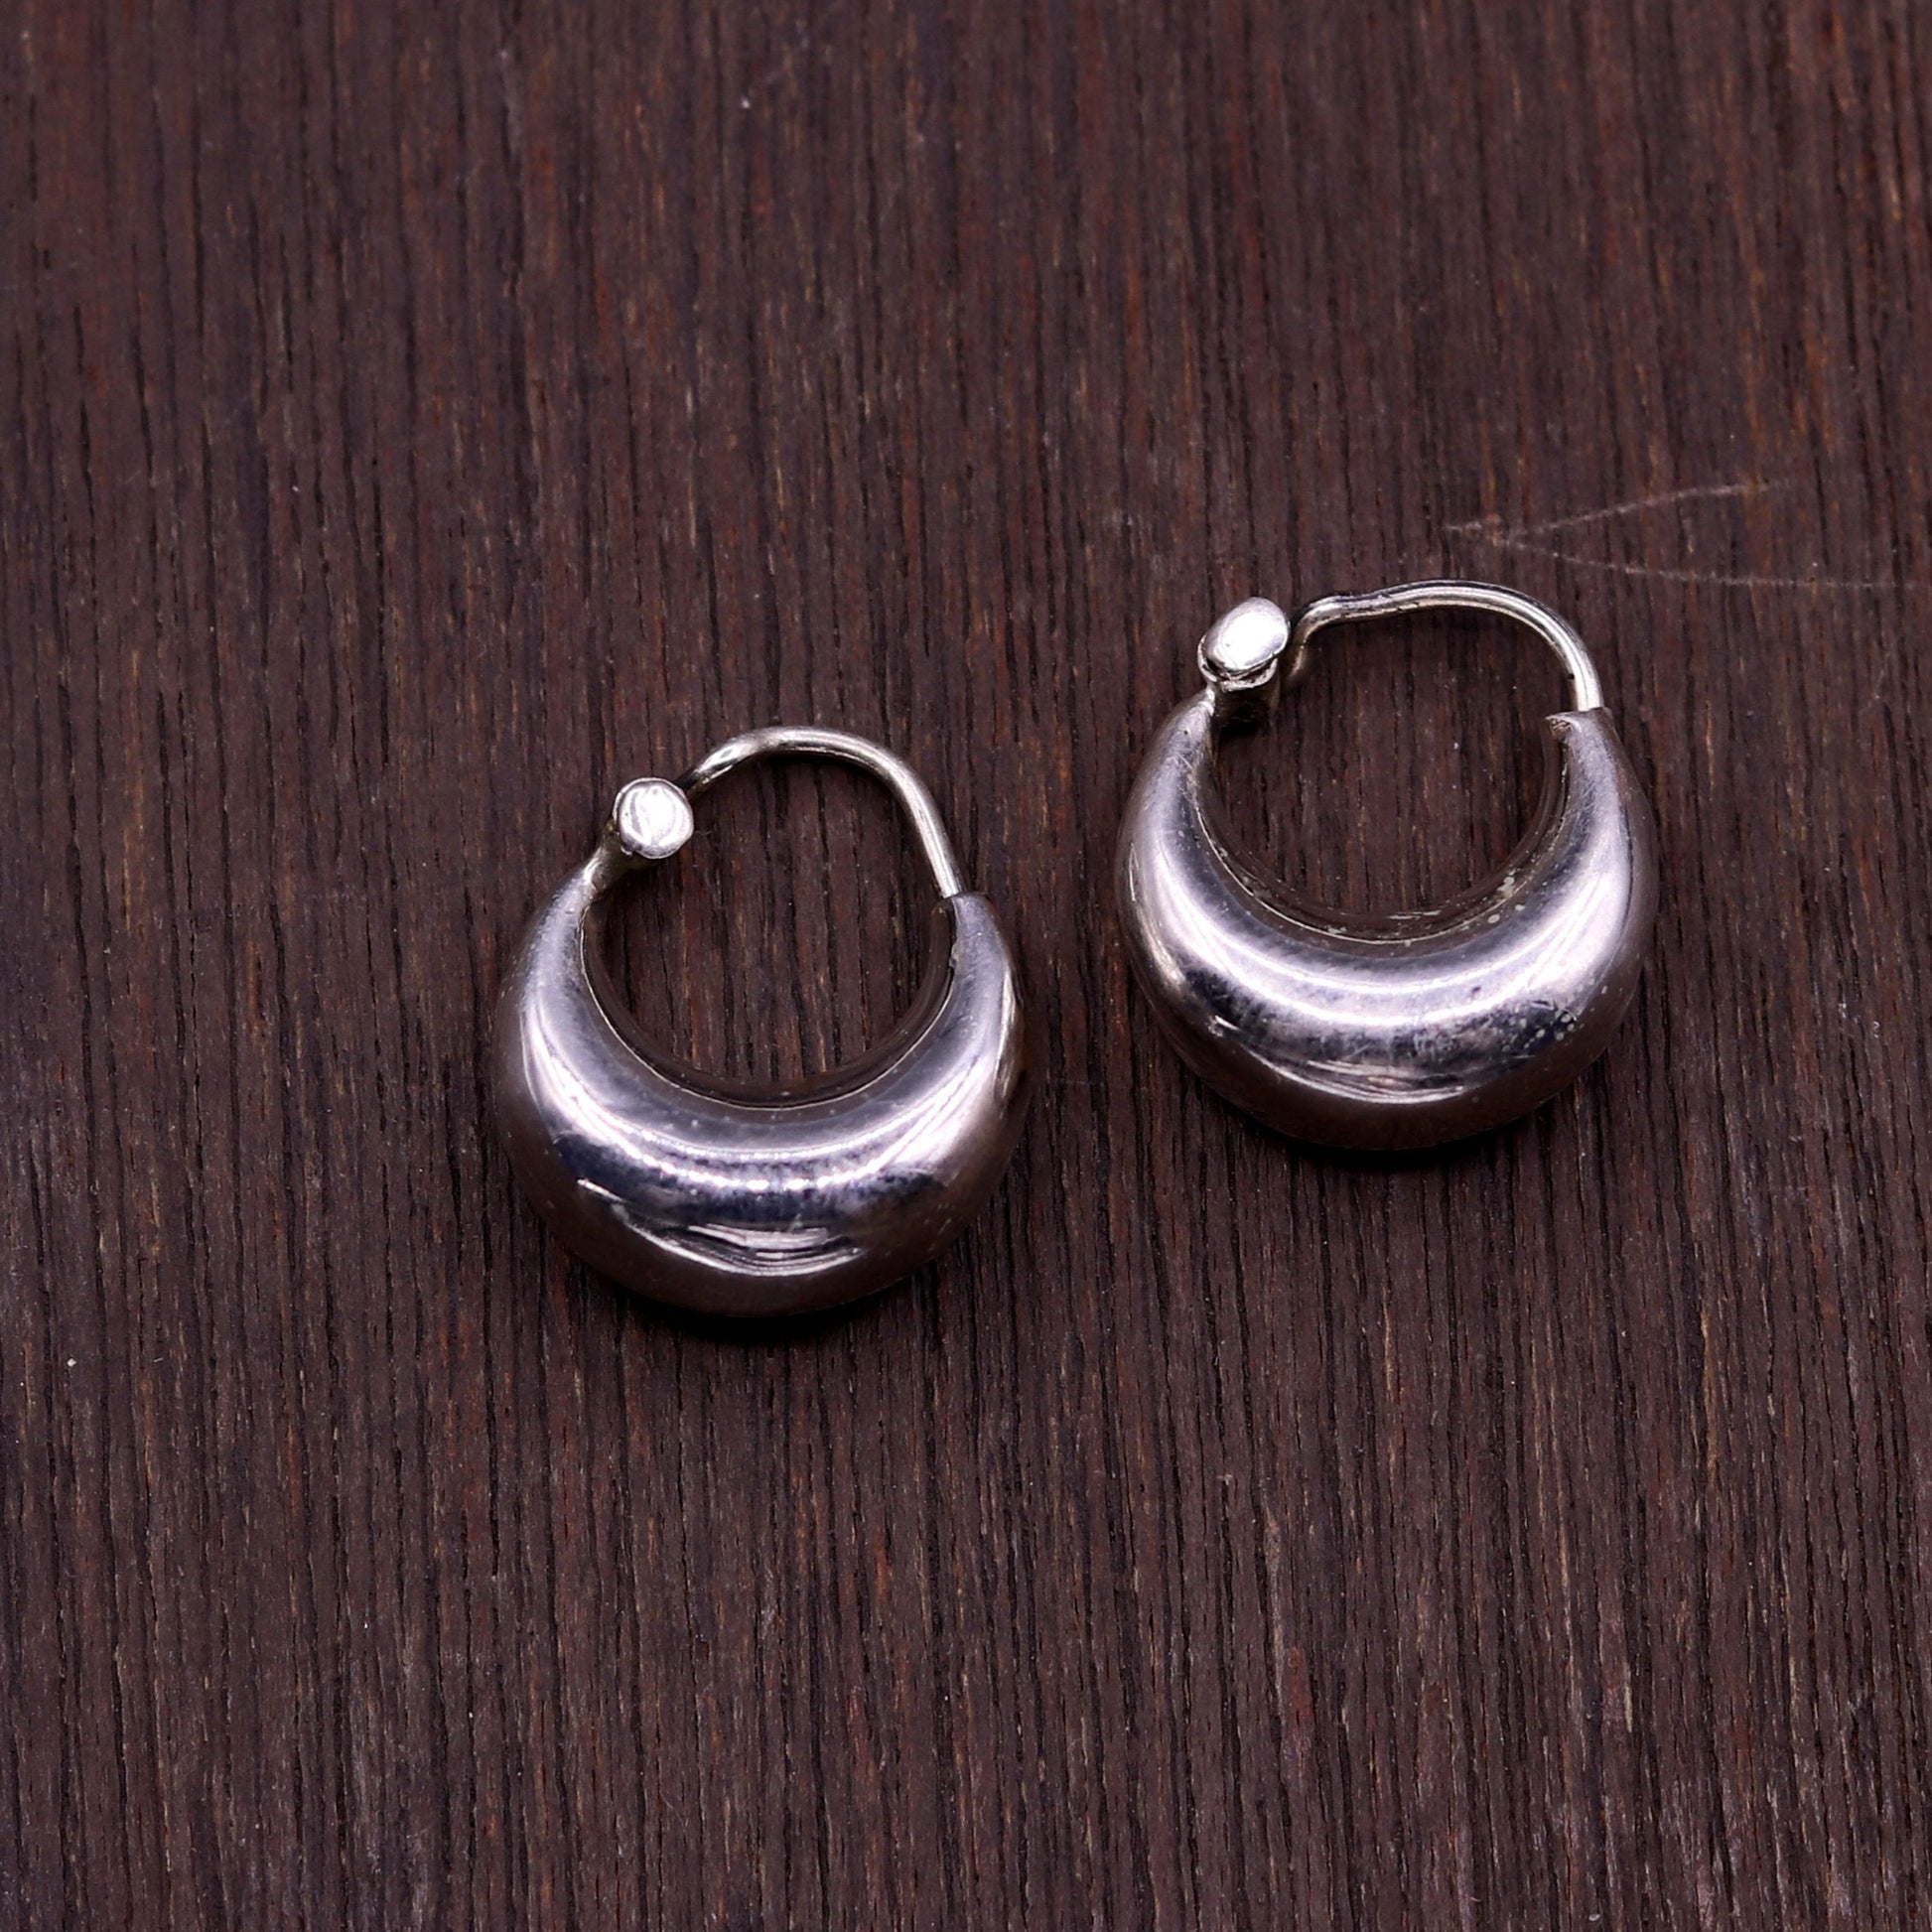 925 sterling silver gorgeous tiny hoops earrings excellent tribal kundal bali personalized gift customized unisex jewelry from india s862 - TRIBAL ORNAMENTS